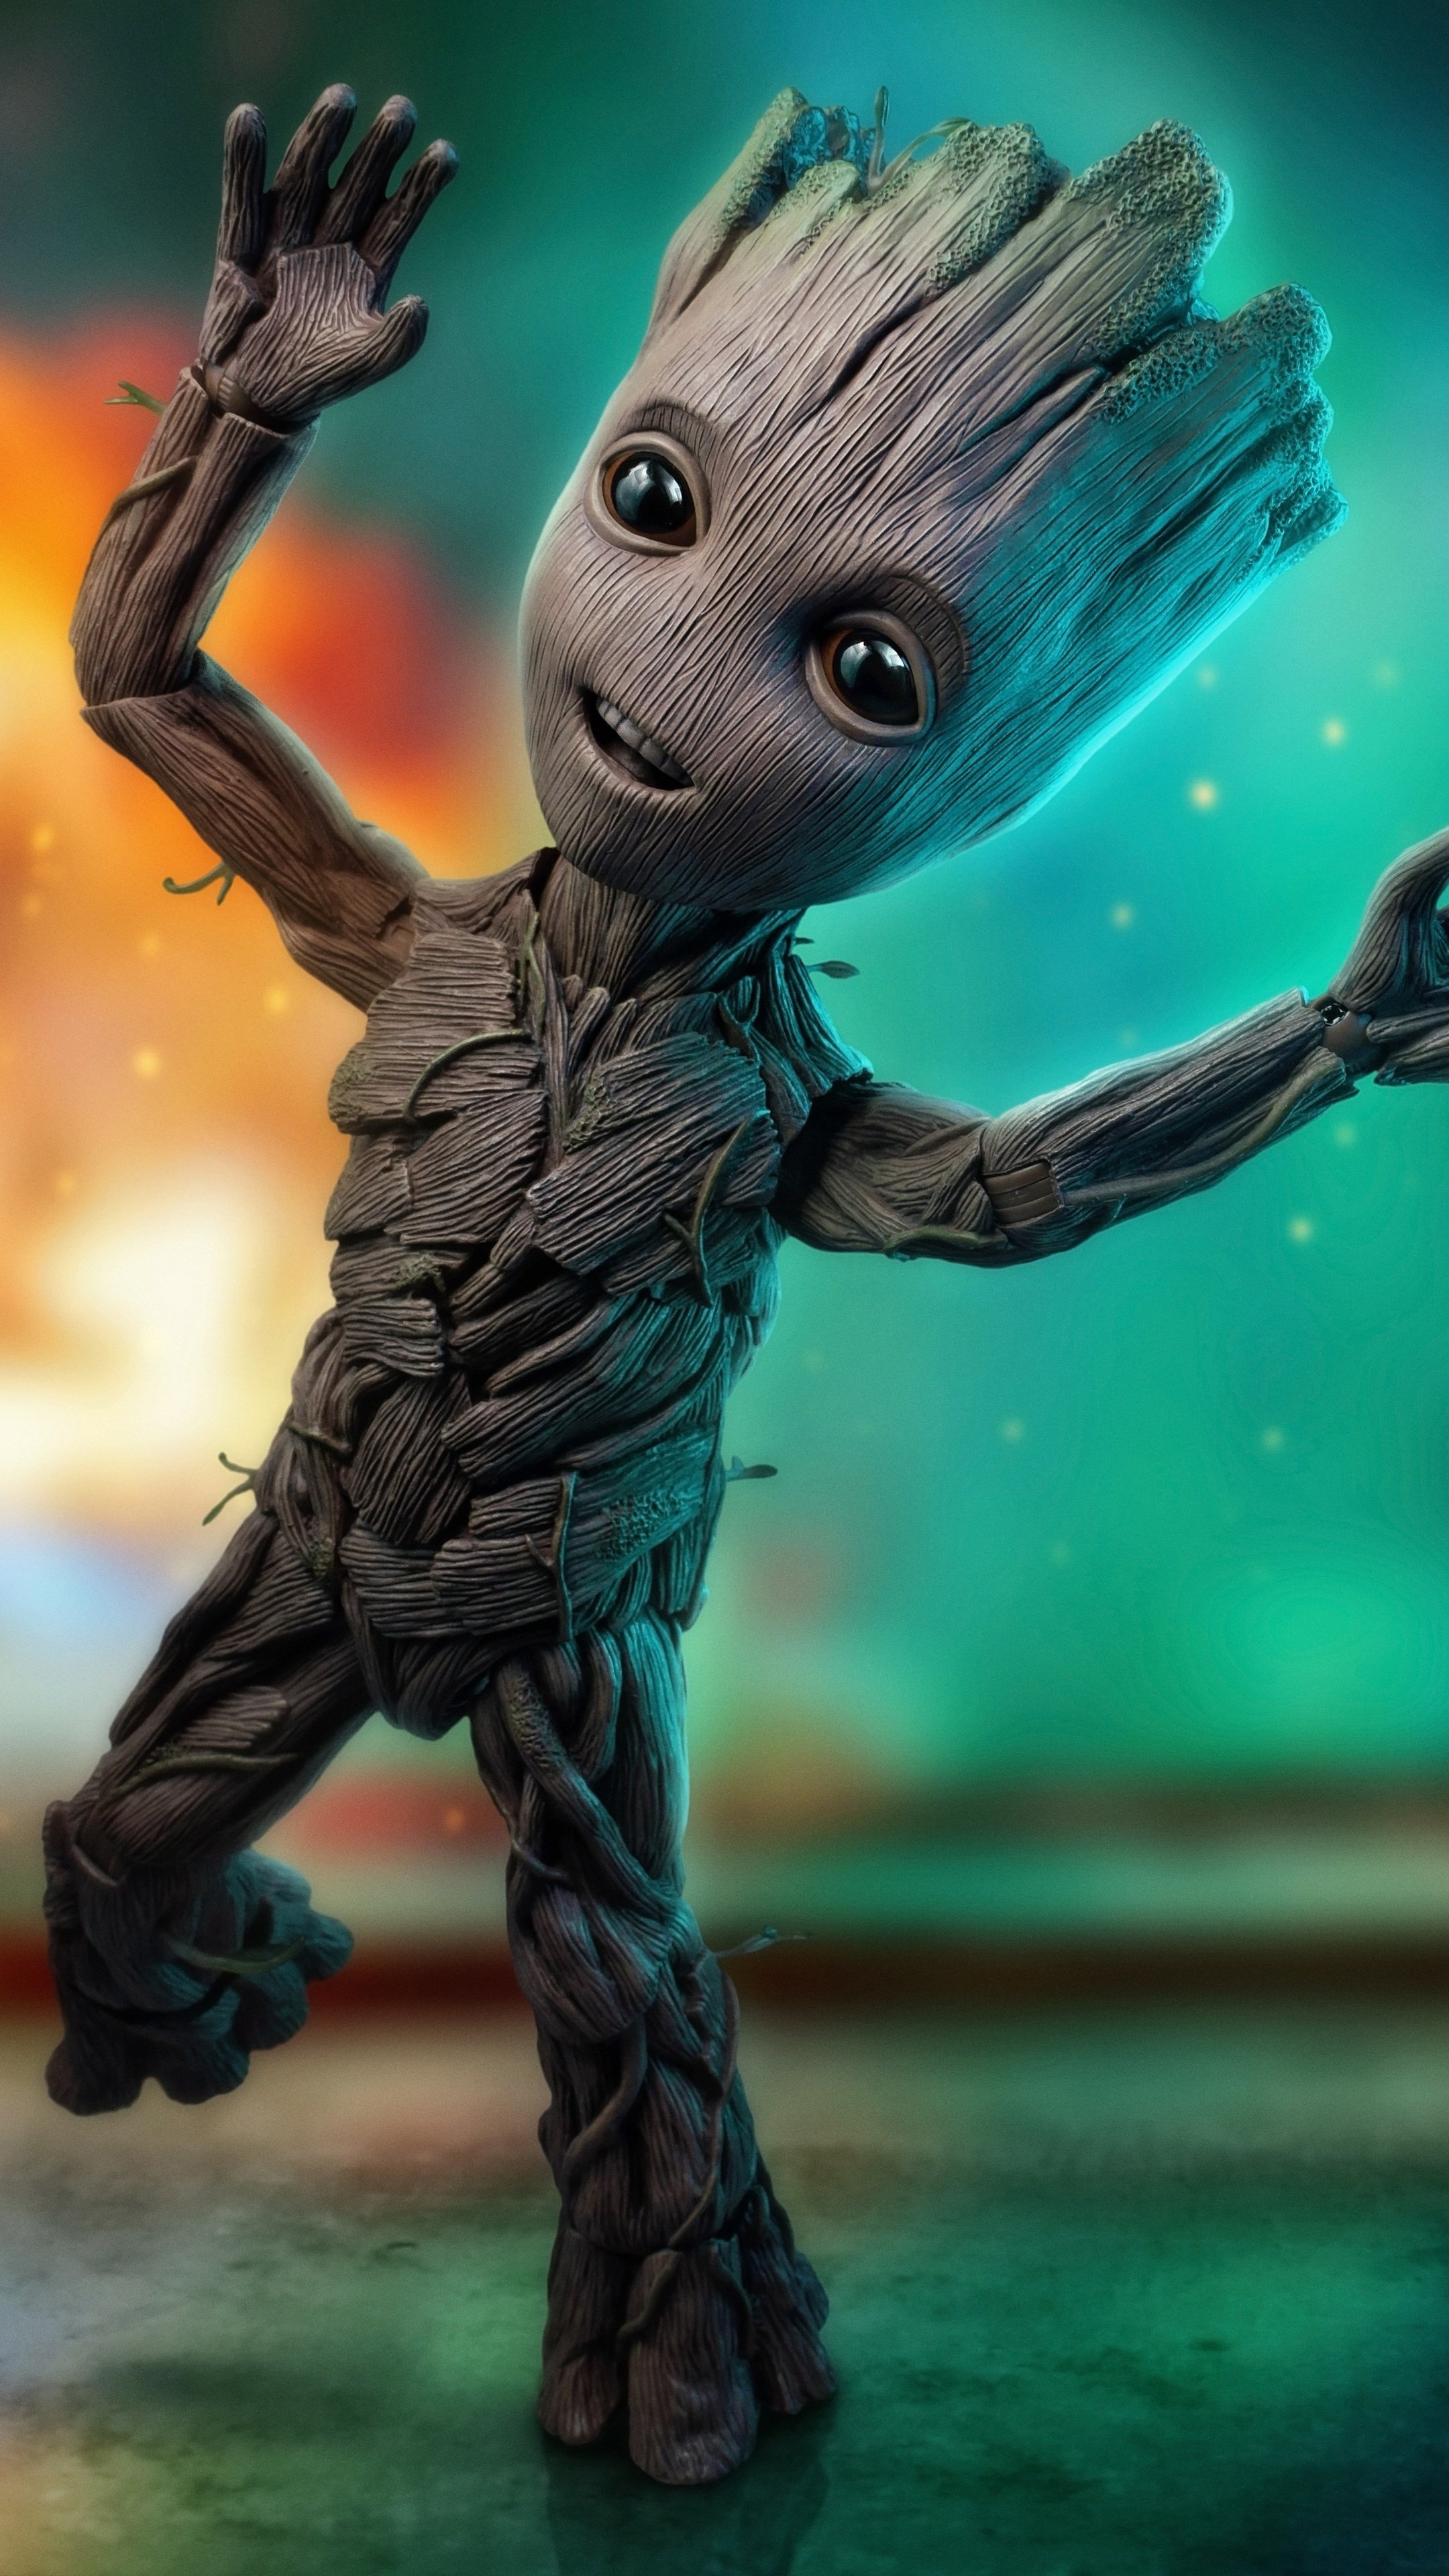 Guardians of the Galaxy Vol. 2, Baby Groot dancing wallpapers, Memorable soundtrack, Cute and lovable, 2160x3840 4K Phone